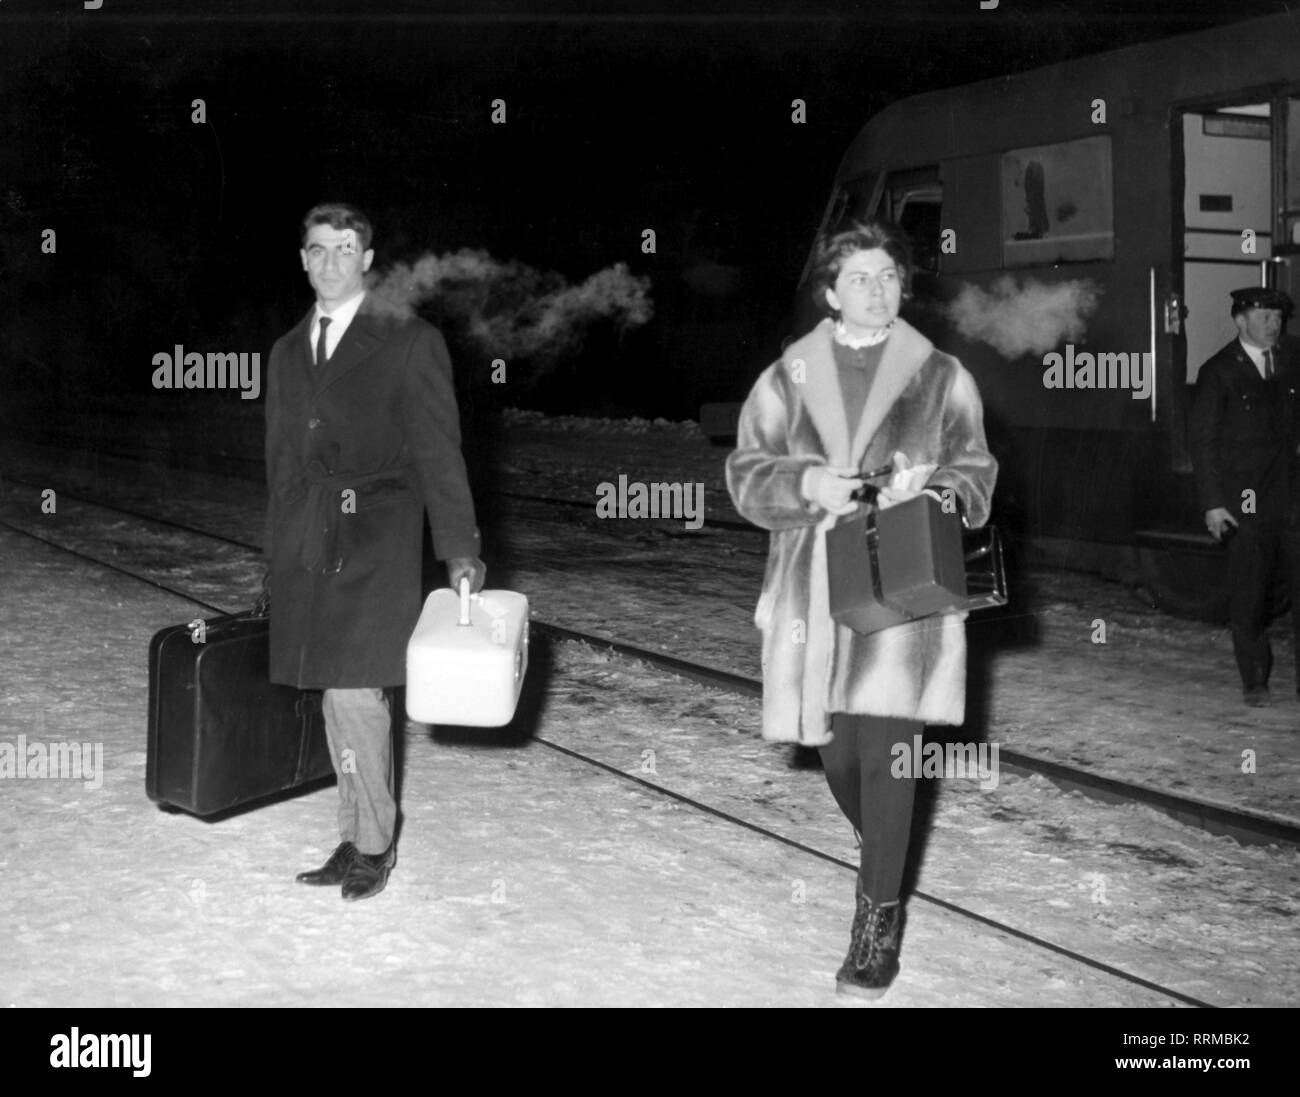 Soraya, 22.6.1932 - 25.10.2001, Empress of Persia 12.2.1951 - 6.4.1958, full length, holiday in Cortina d'Ampezzo, arrival at railway station Dobiaco, February 1963, Additional-Rights-Clearance-Info-Not-Available Stock Photo